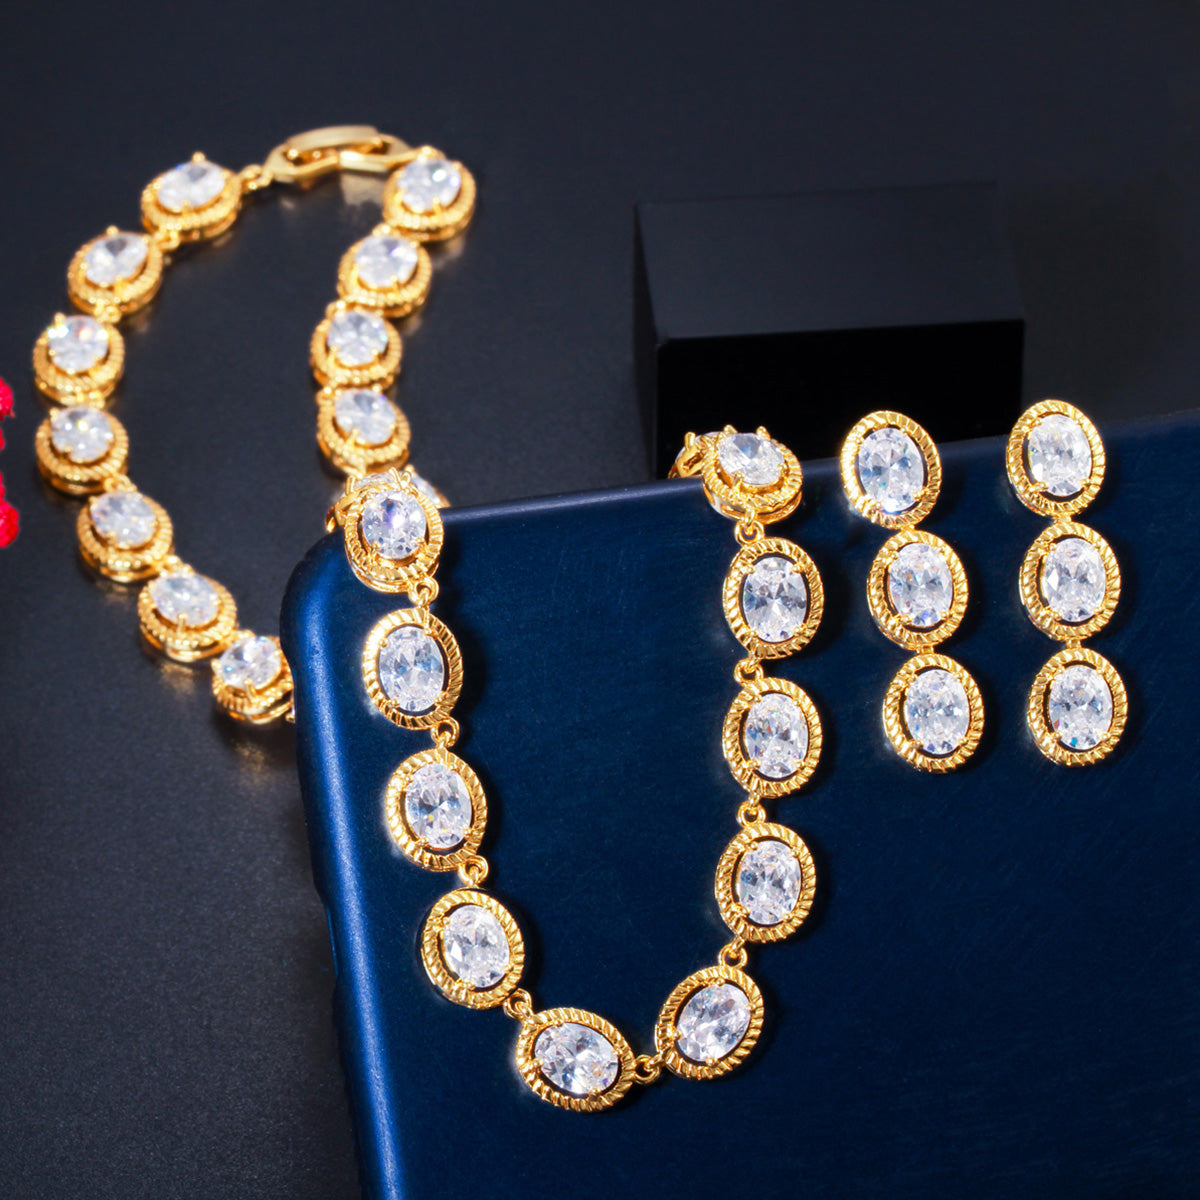 Luxury Royal Blue Oval CZ Crystal Women Wedding Party Necklace Earrings Bridal Jewelry Sets